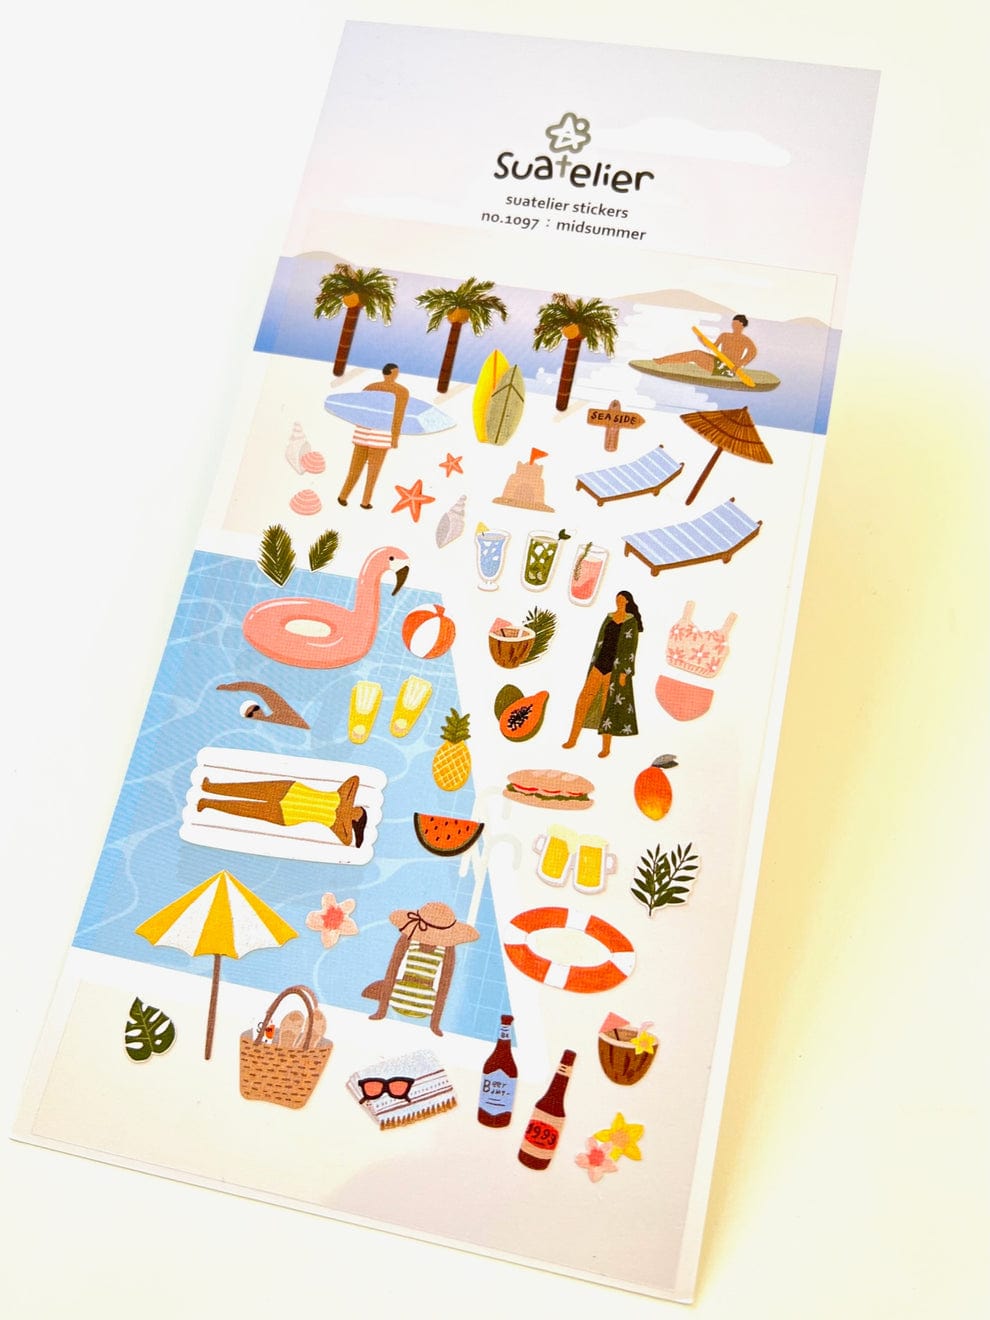 Midsummer Pool Party Suatelier Stickers